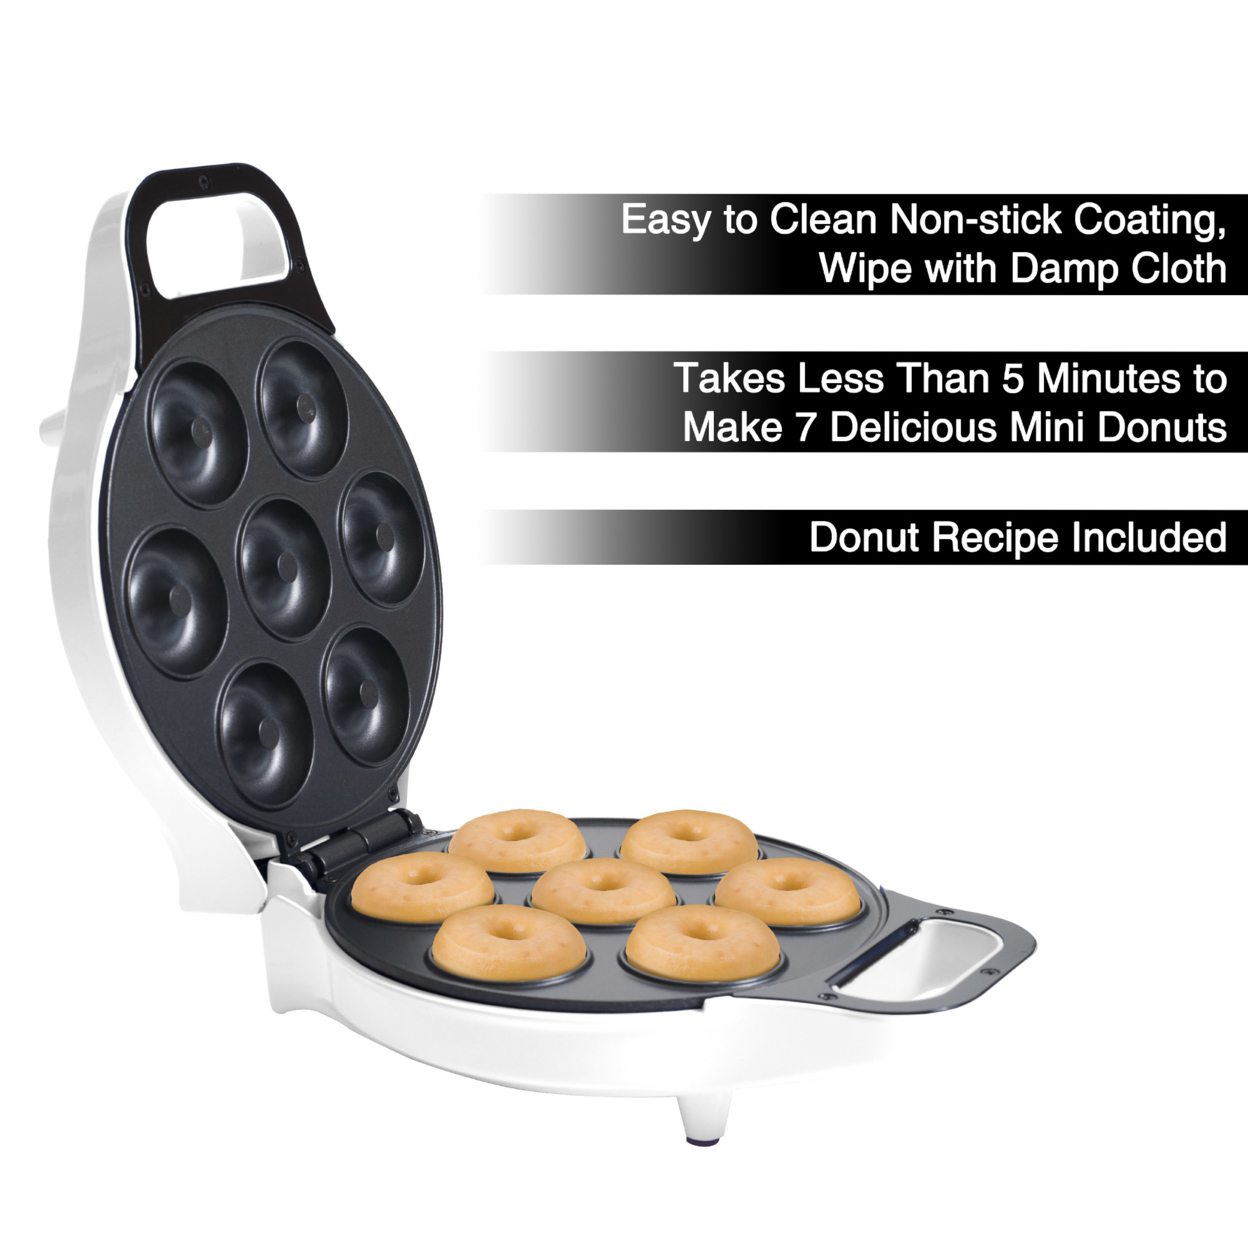 Electric Mini Donut Maker 7 Two-Inch Donuts Non Stick, No Oil Or Frying Makes Donuts In 3 - 5 Minutes